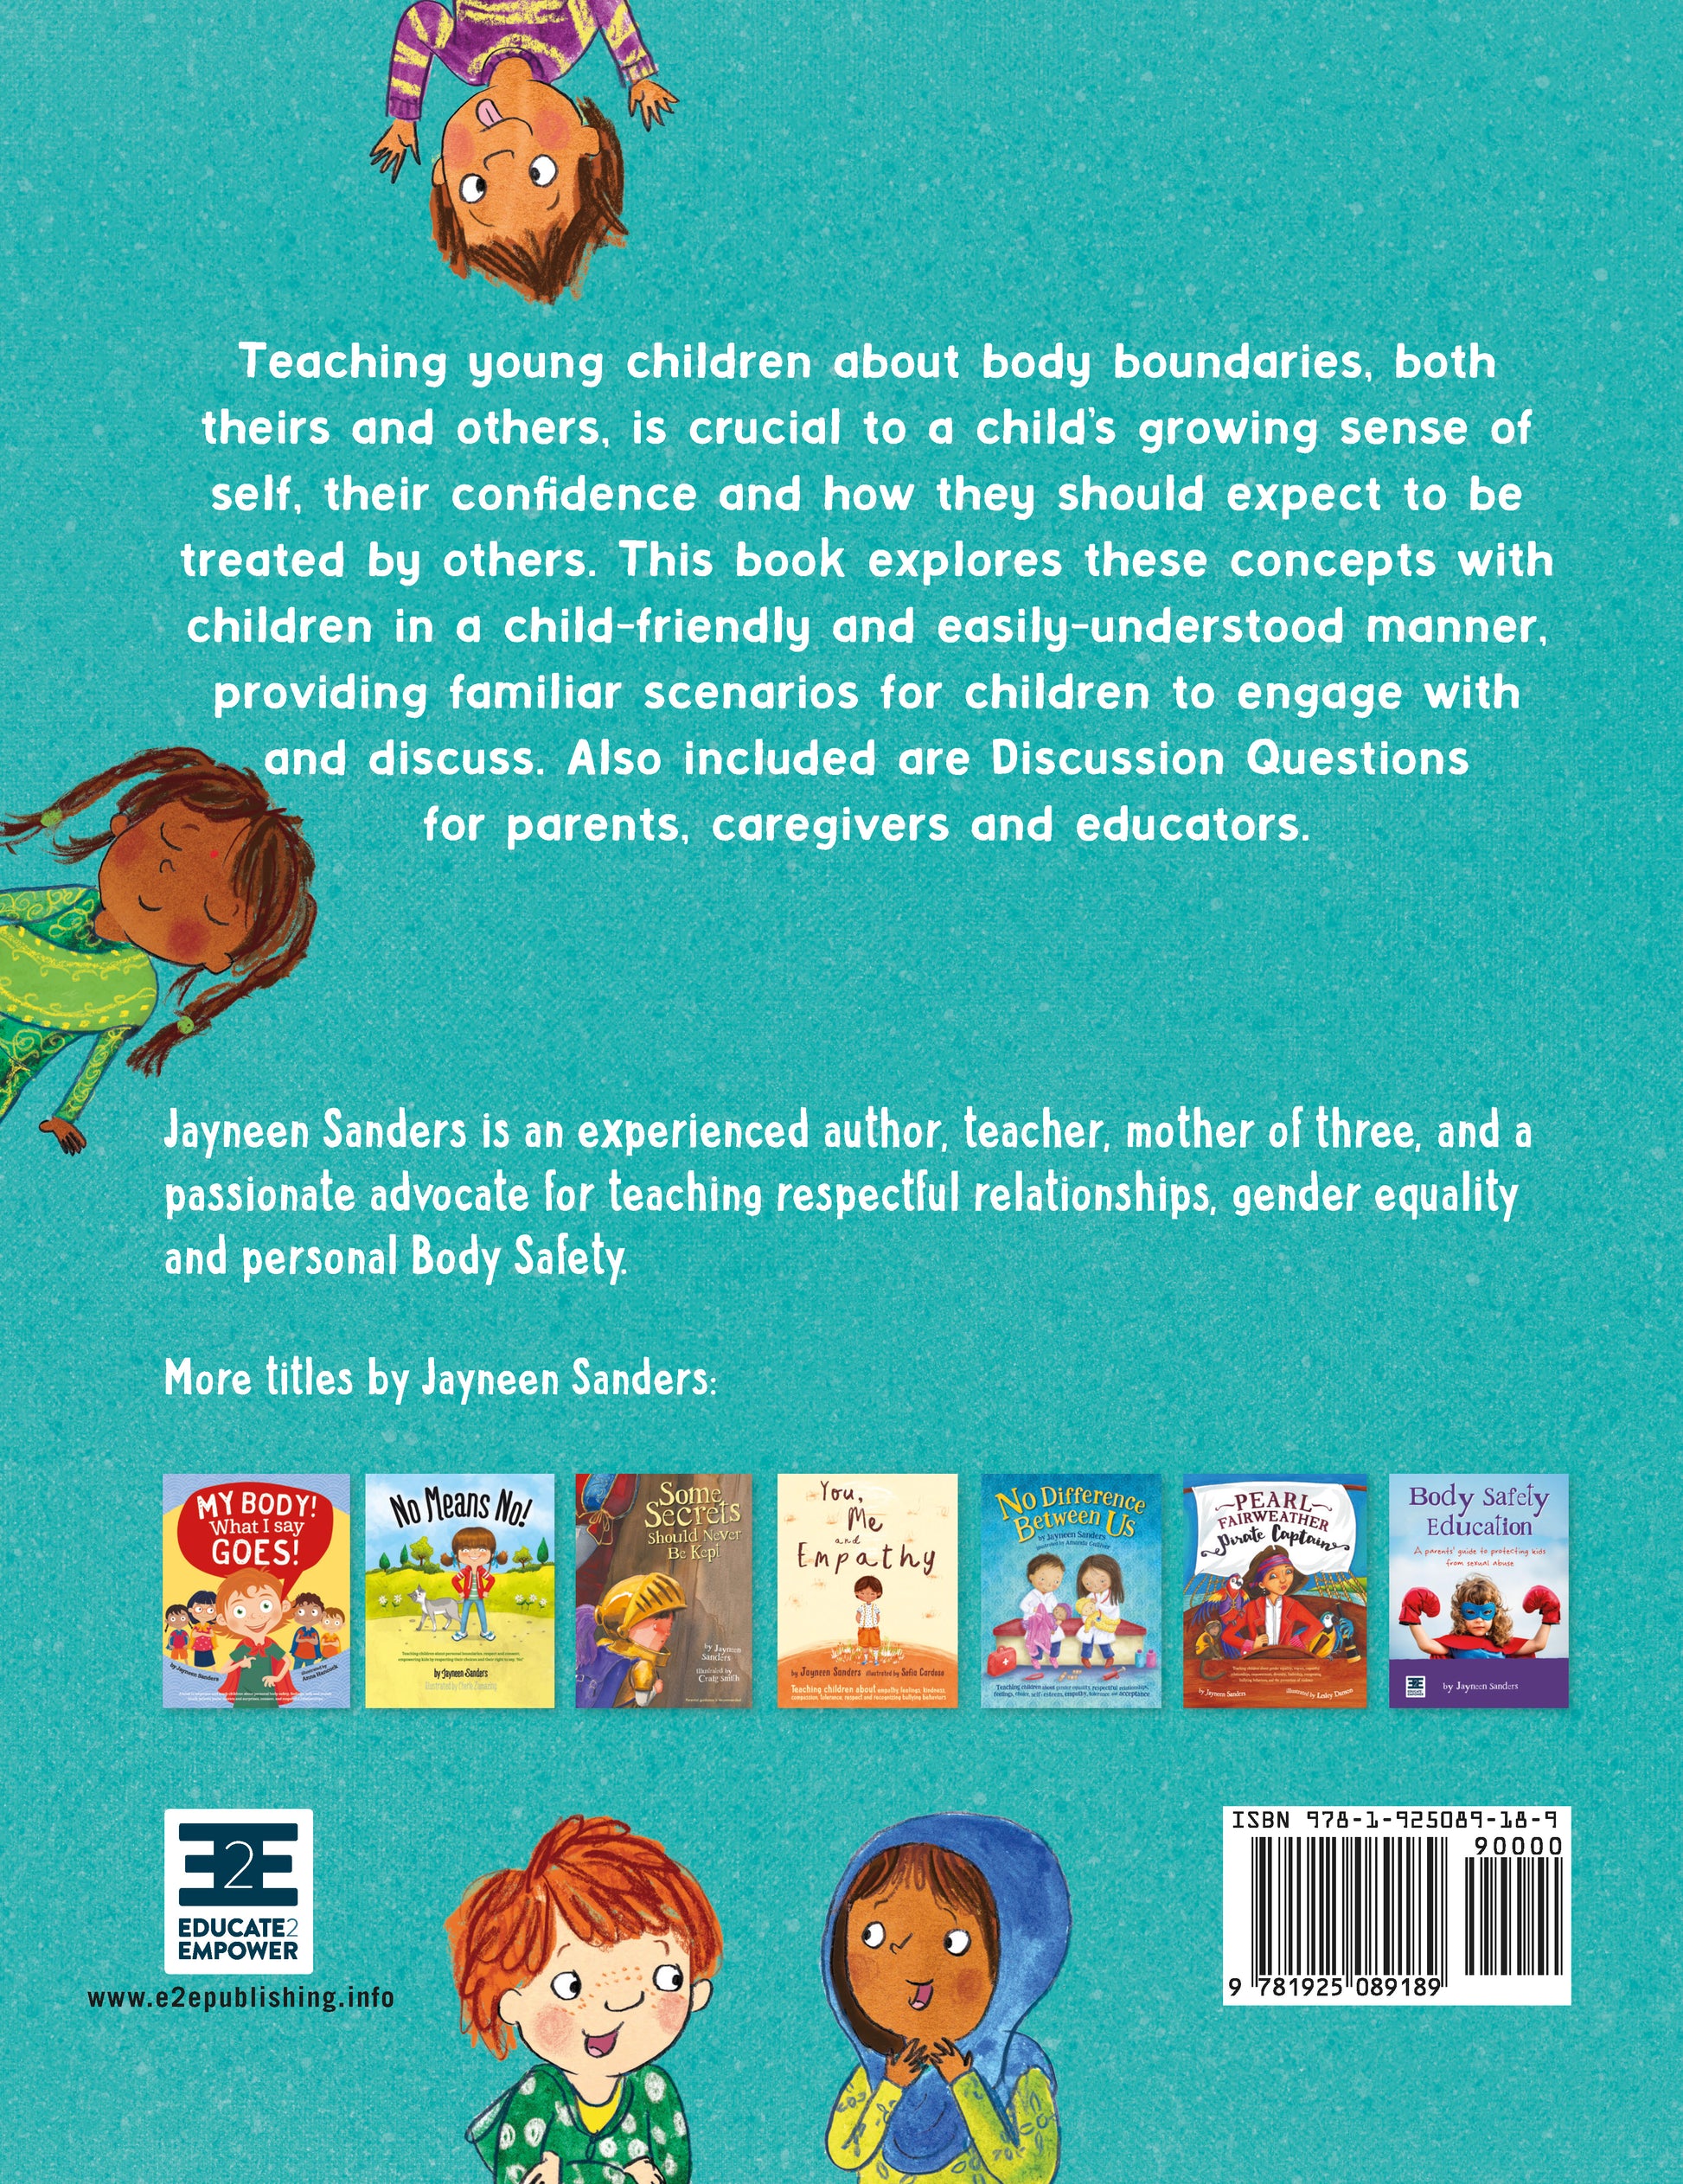 The back cover of the book ‘Let's Talk About Body Boundaries, Consent & Respect’ by Jayneen Sanders.